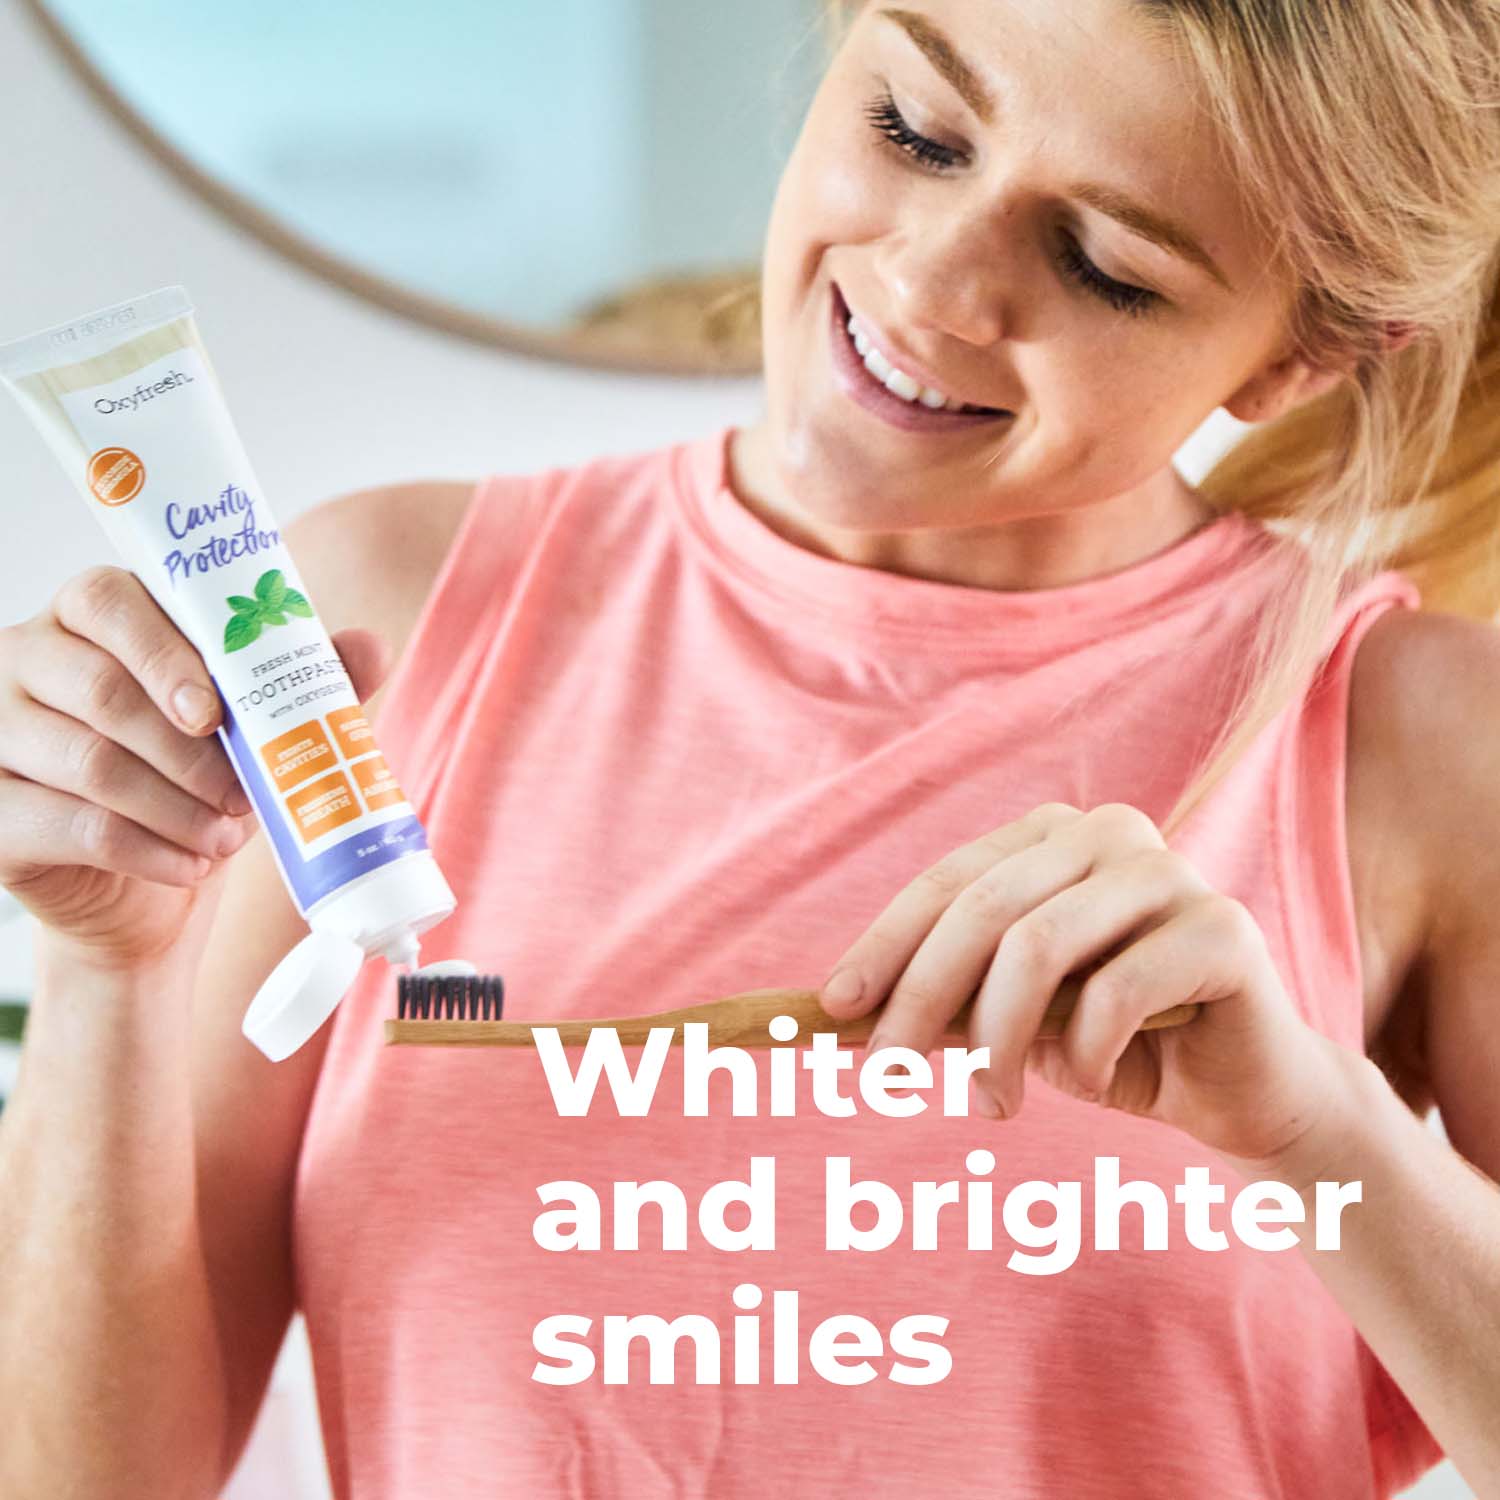 oxyfresh-cavity-protection-fluoride-toothpaste-whiter-and-brighter-smiles